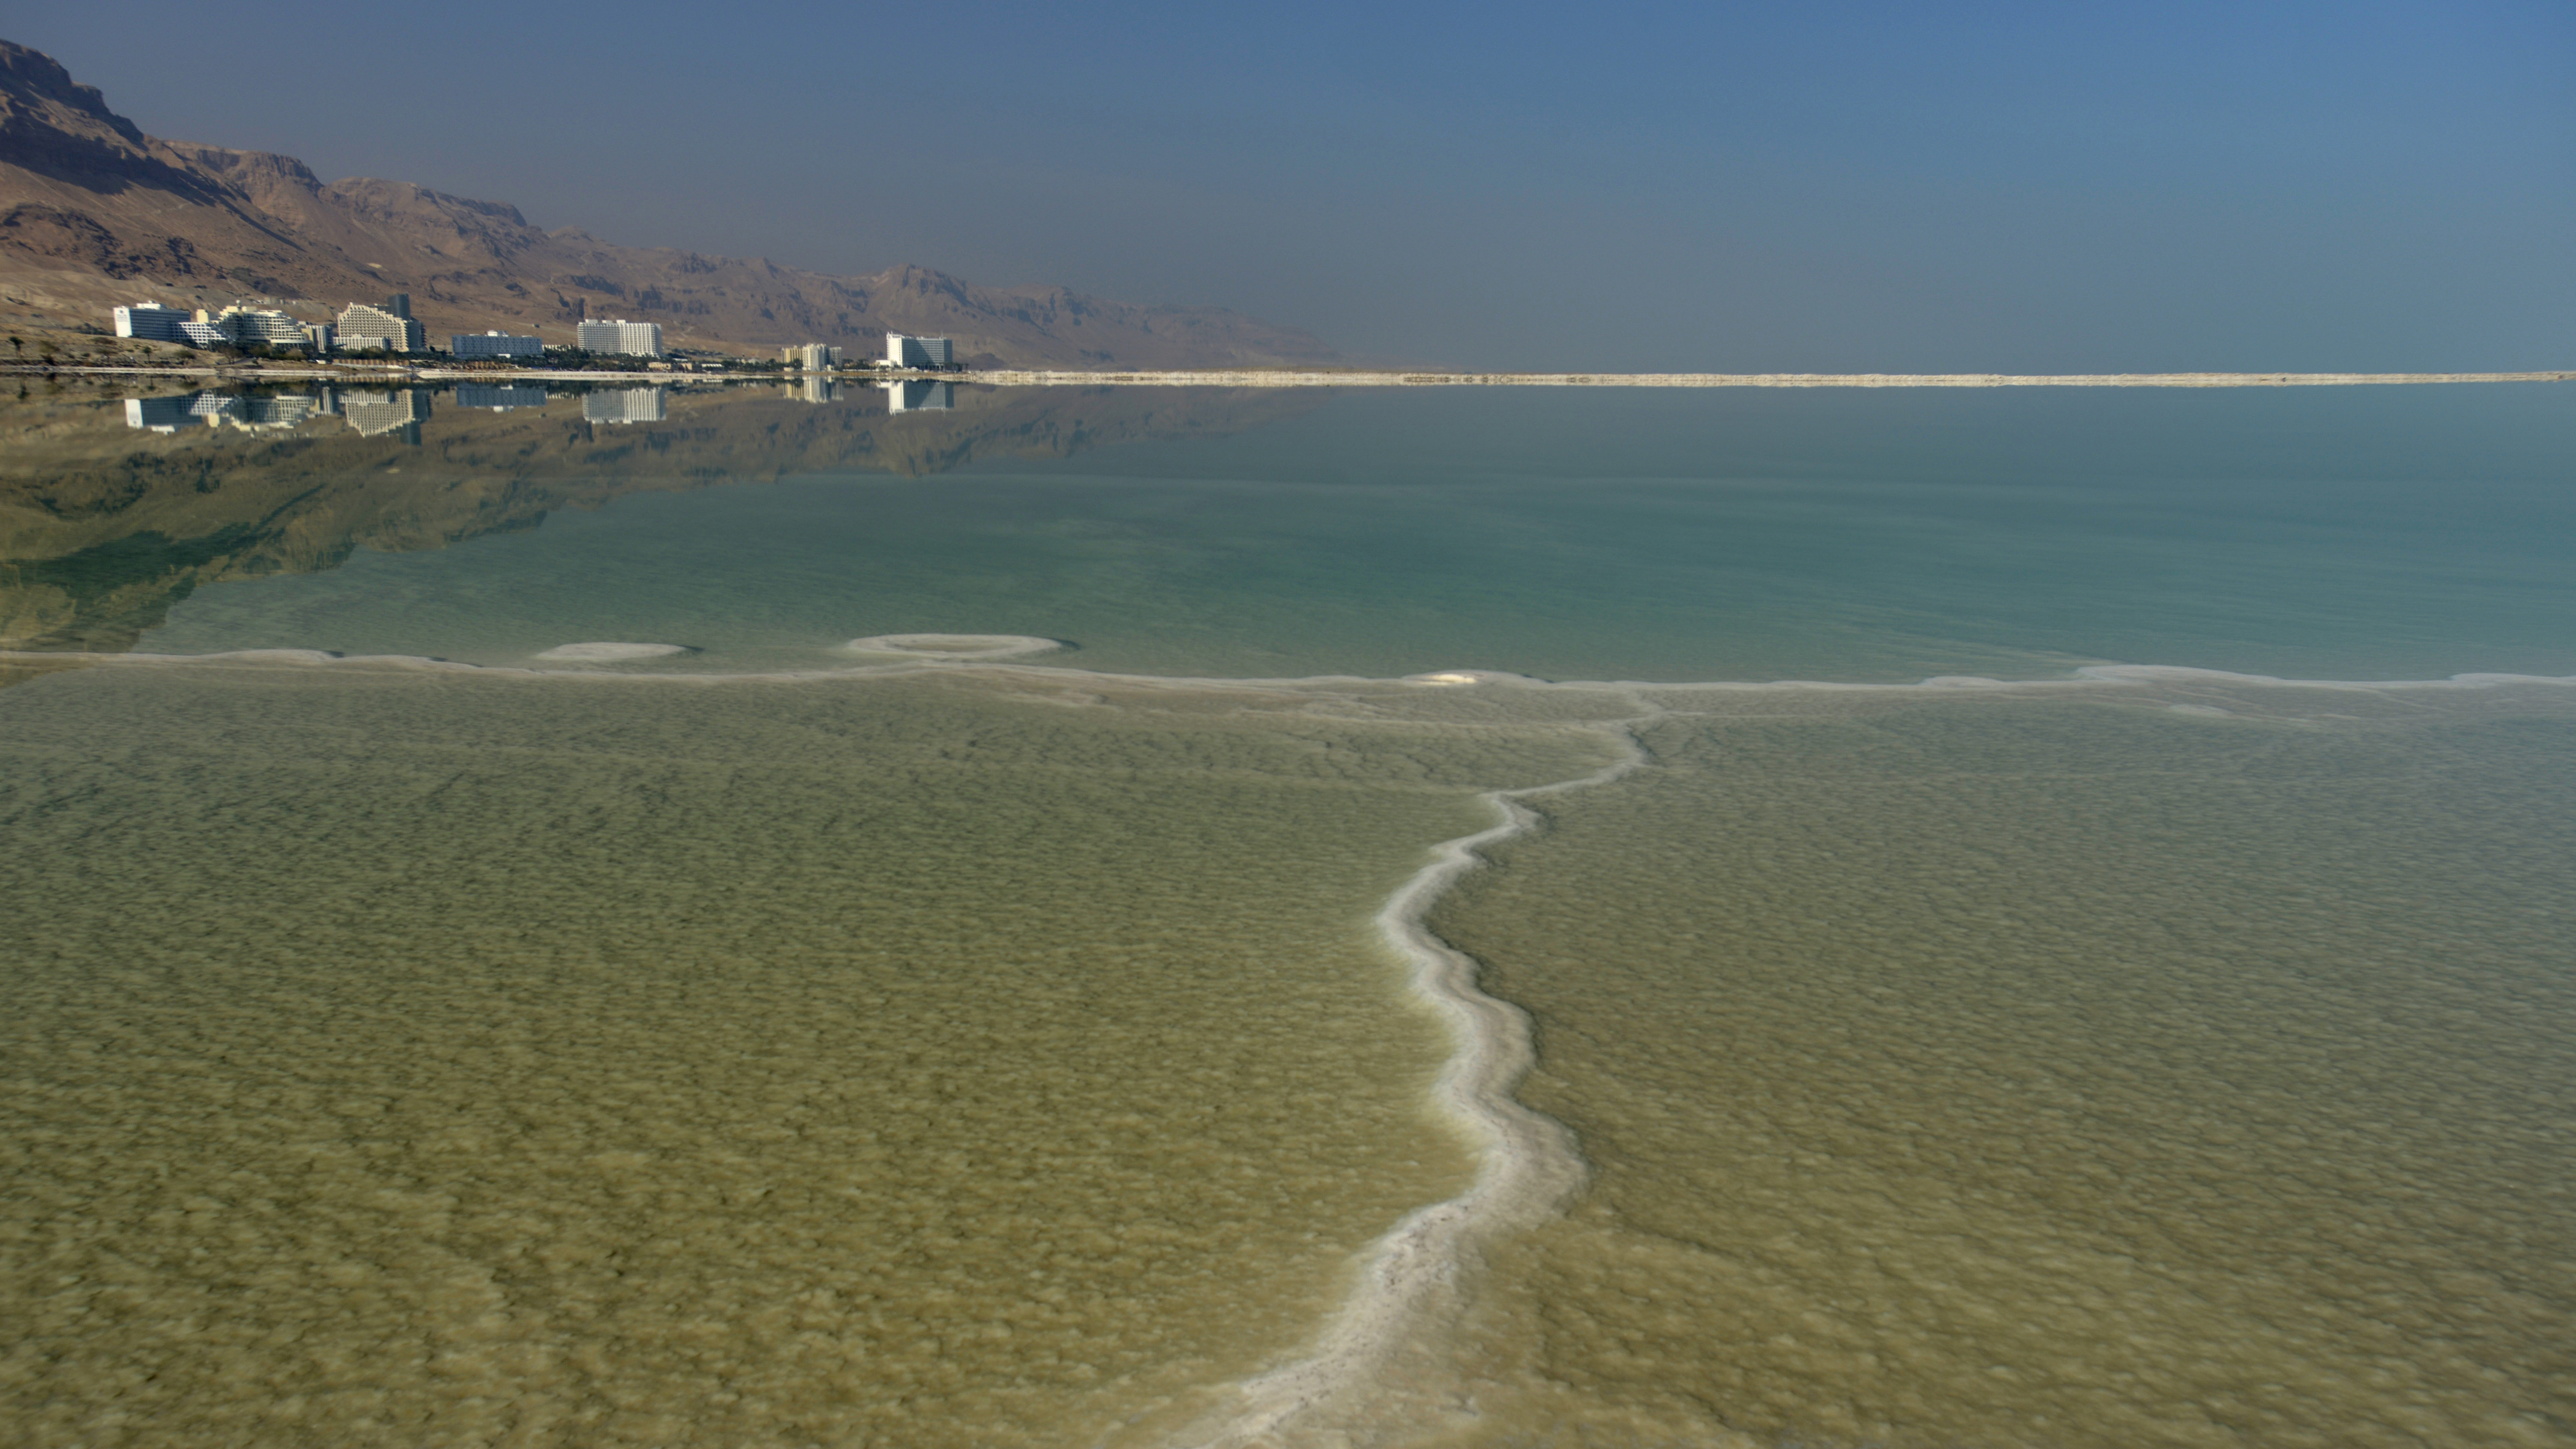 1,000 New Hotel Rooms to Be Built at Dead Sea